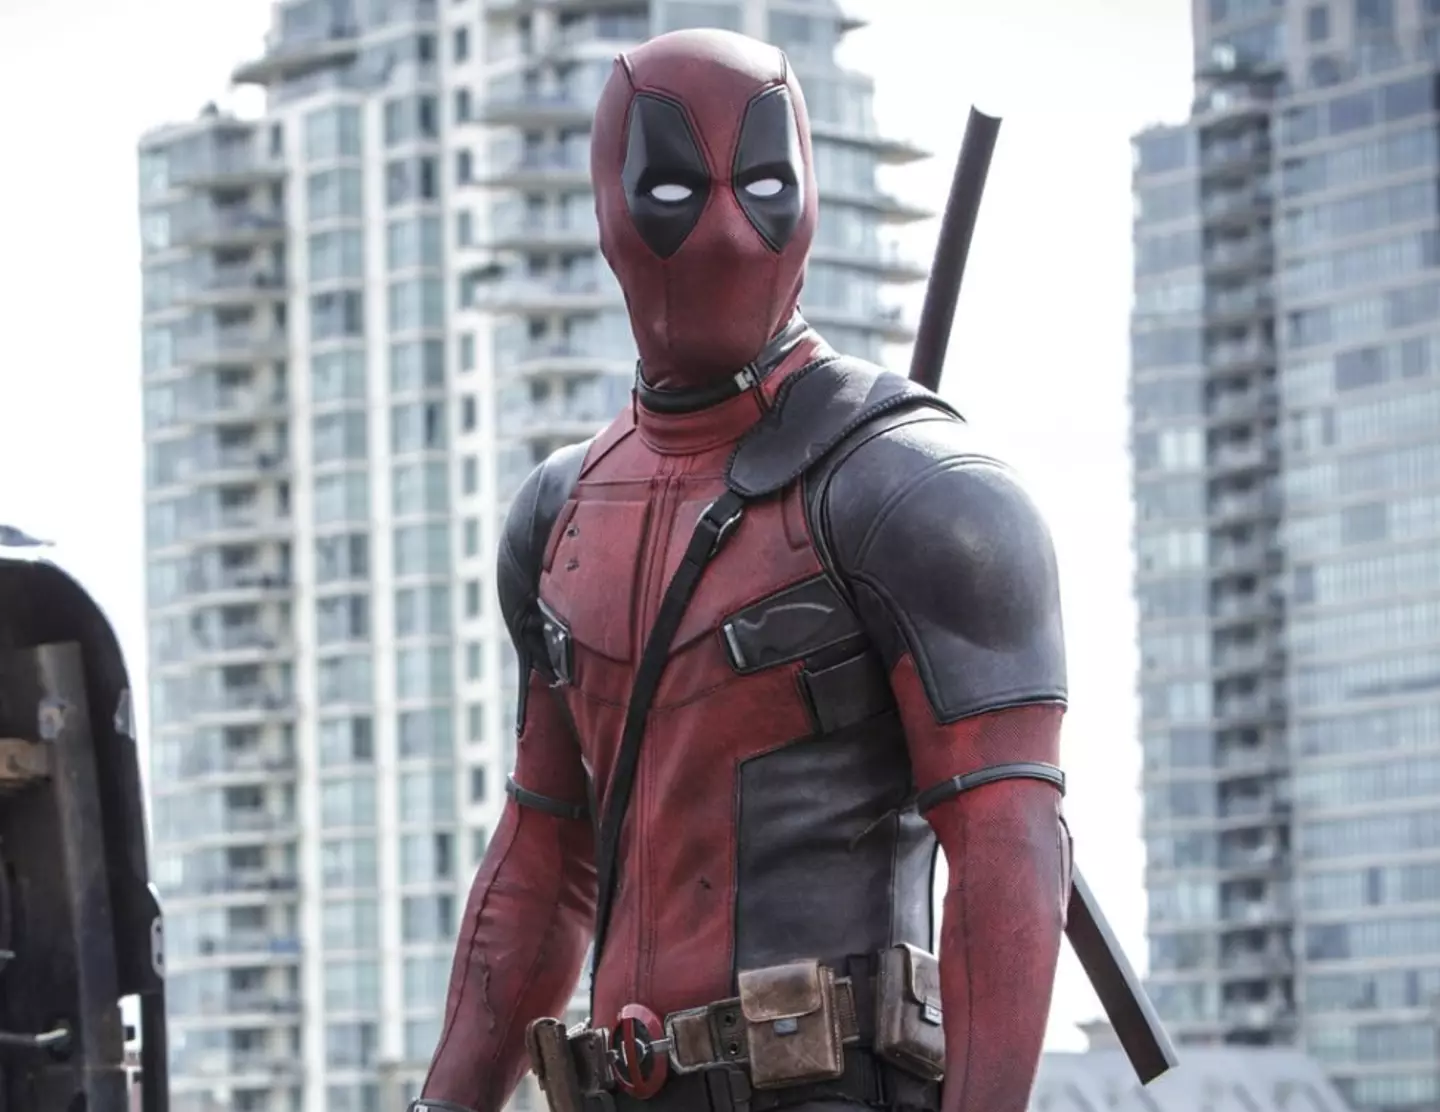 Ryan Reynolds is back in the red suit for Deadpool 3.